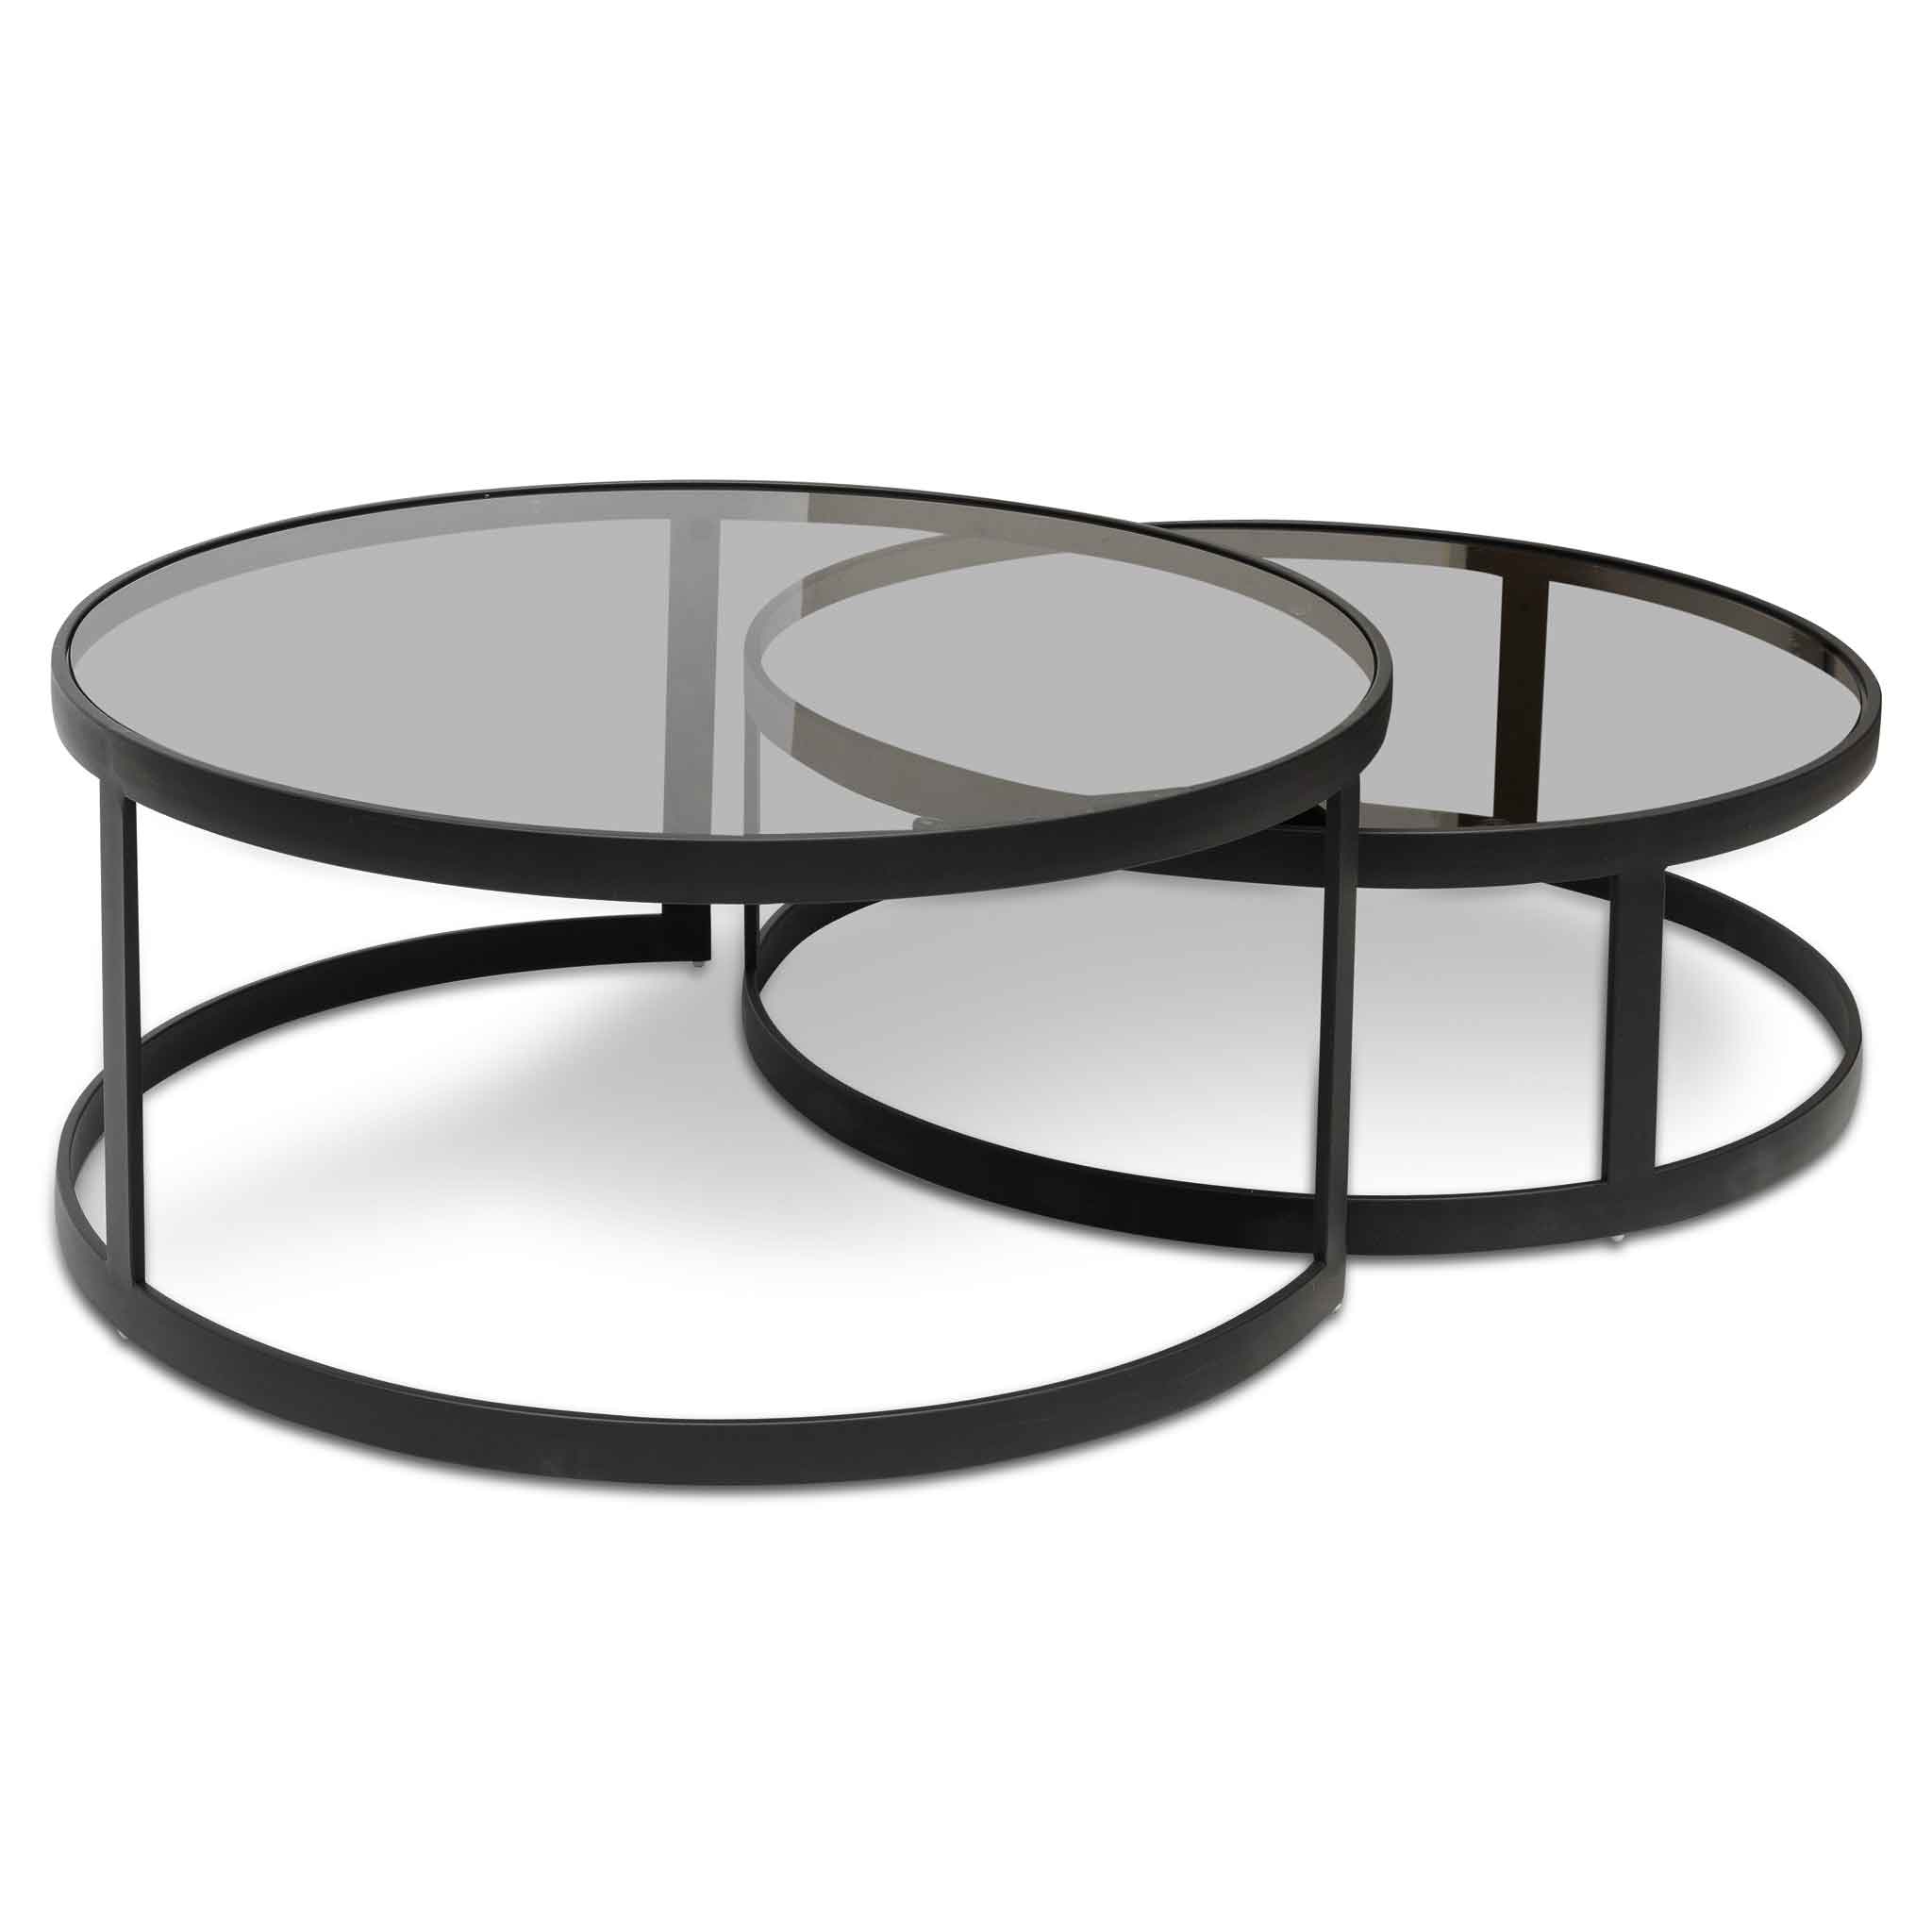 Nested Grey Glass Coffee Table - Black Base_3